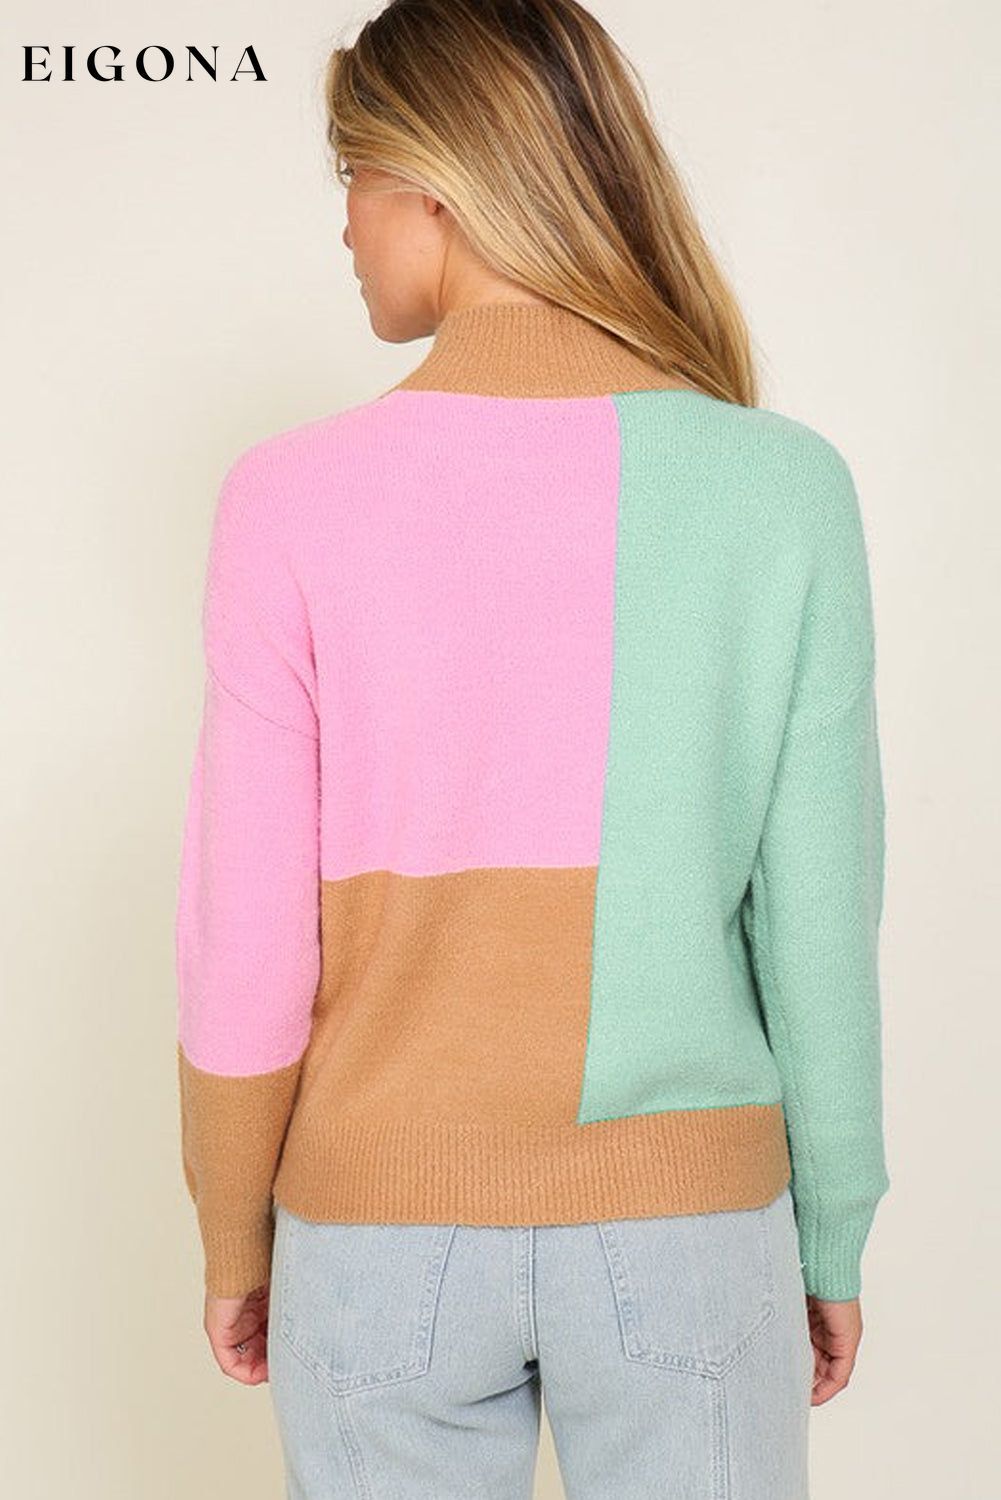 Multicolour Colorblock Mock Neck Ribbed Trim Sweater All In Stock Best Sellers clothes Color Green Color Multicolor Color Pink EDM Monthly Recomend Hot picks long sleeve shirt long sleeve shirts long sleeve top long sleeve tops Occasion Daily Print Color Block Season Fall & Autumn shirt shirts Style Southern Belle sweaters top tops